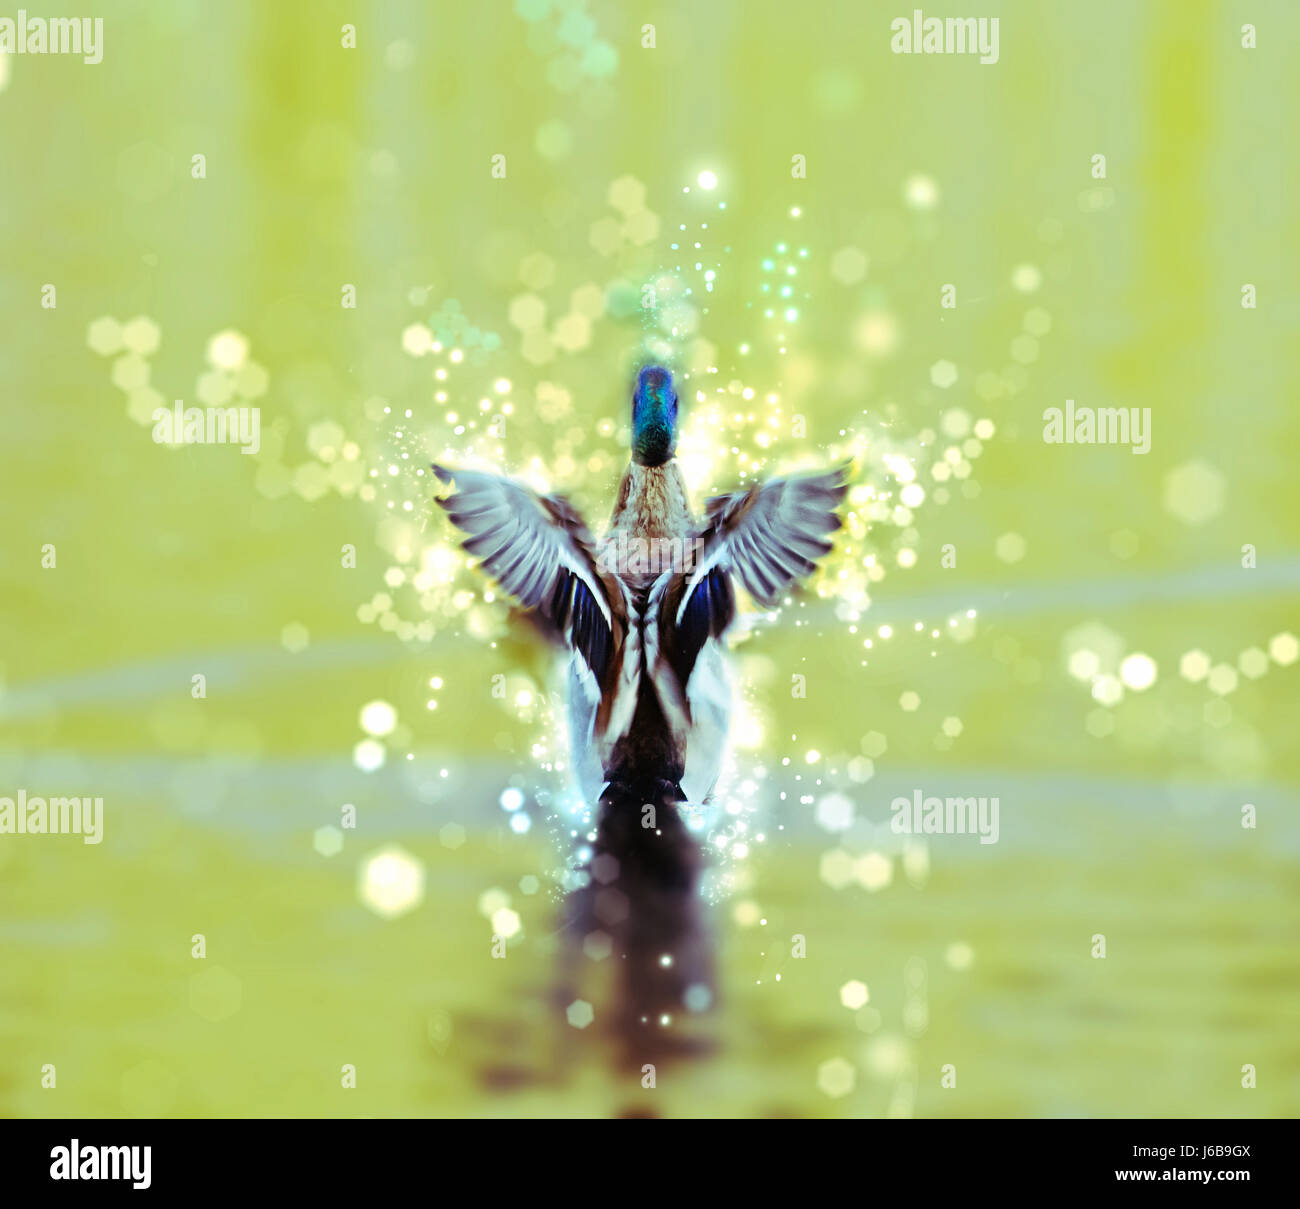 Mallard duck - Anas platyrhynchos - fly out of yellow water. Bird scene. Green photo filter. Shimmering background. Stock Photo